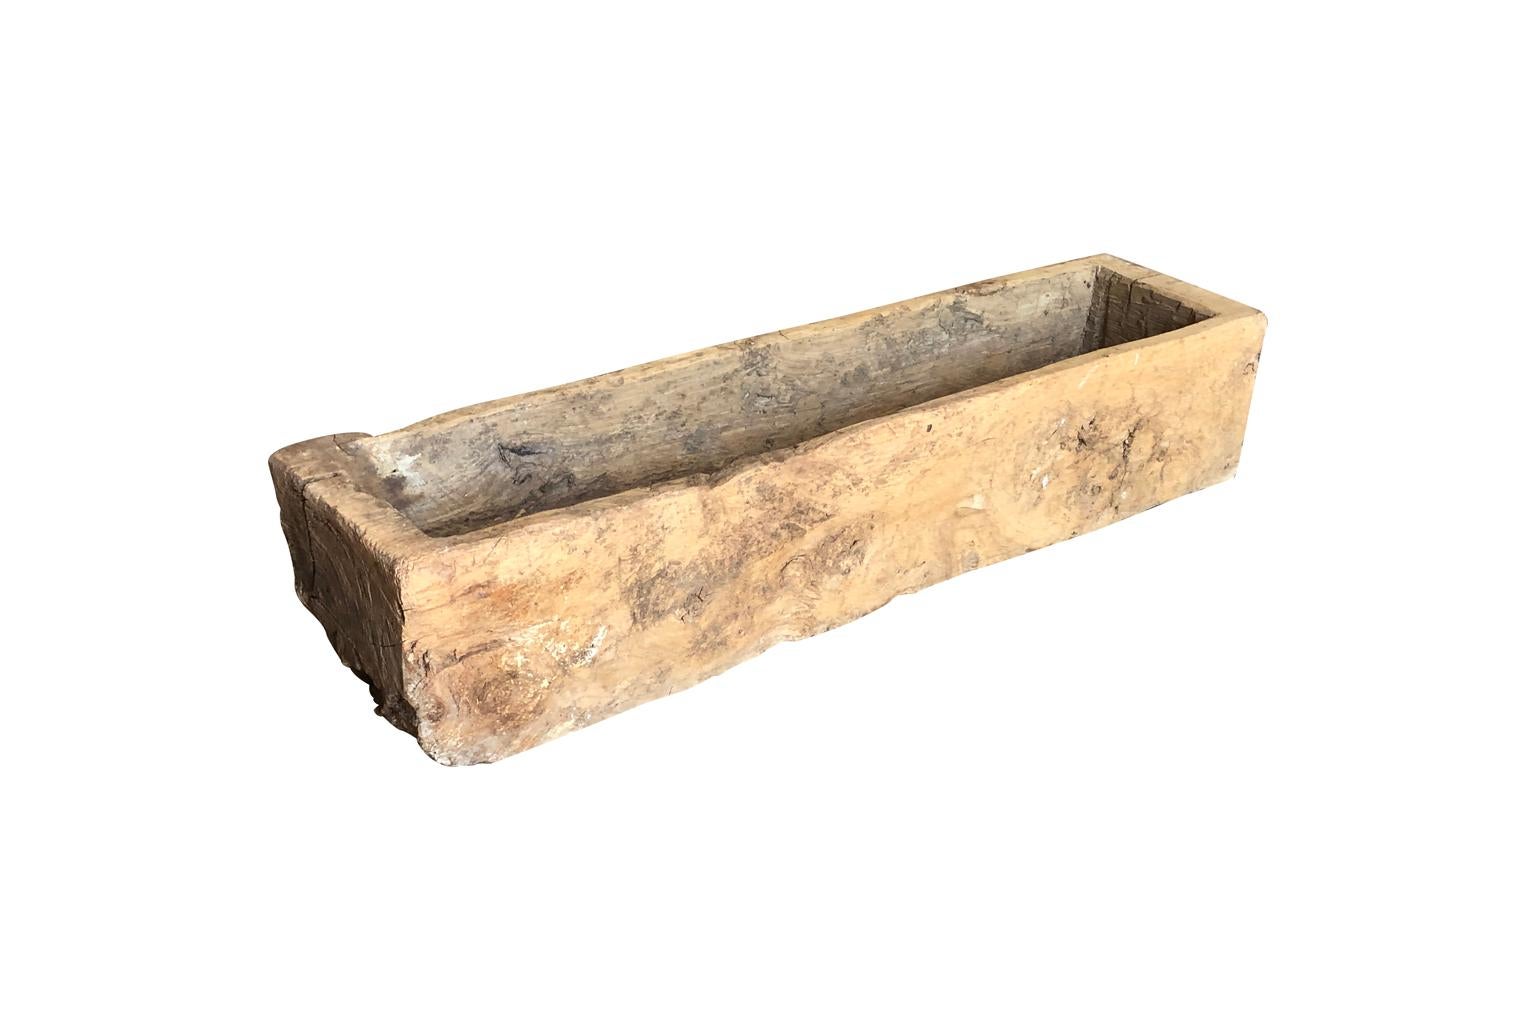 A very handsome primitive trough from the Catalan region of Spain. The trough is beautifully carved from a large solid block of wood. Serves wonderfully as a planter or a center piece to a farm table.